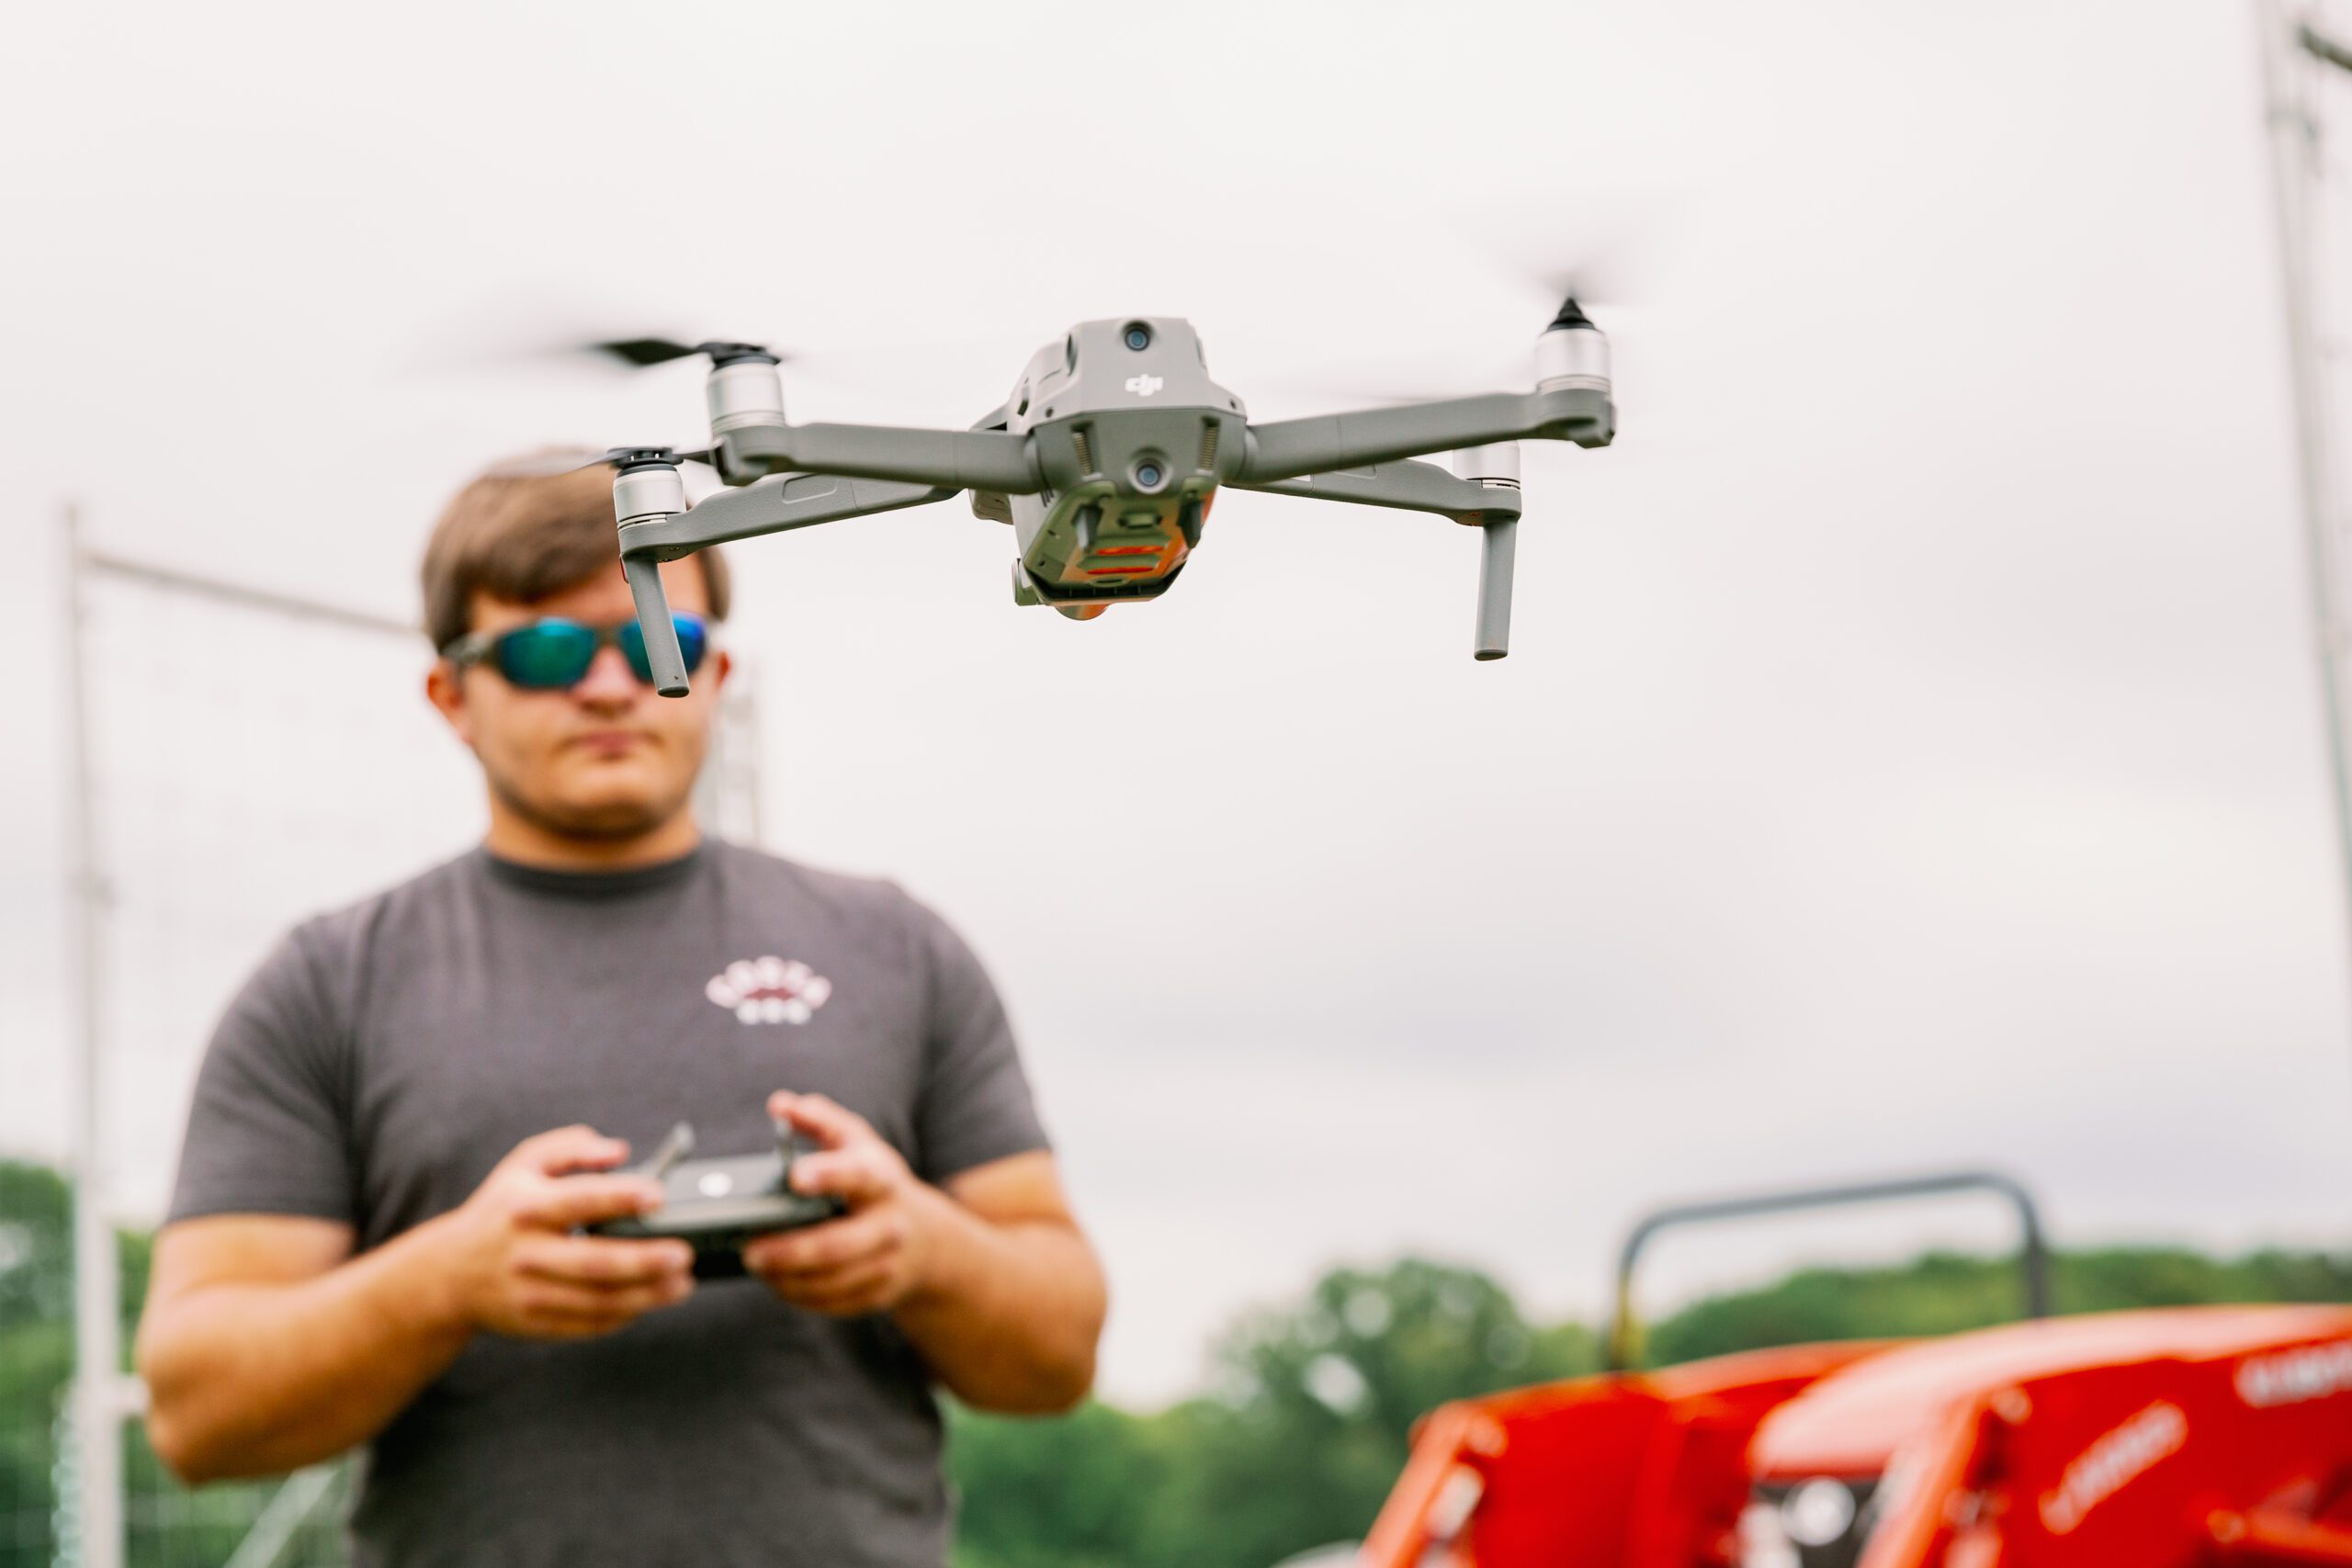 A quadricopter drone/uav being piloted by a student wearing a grey t-shirt and sunglasses